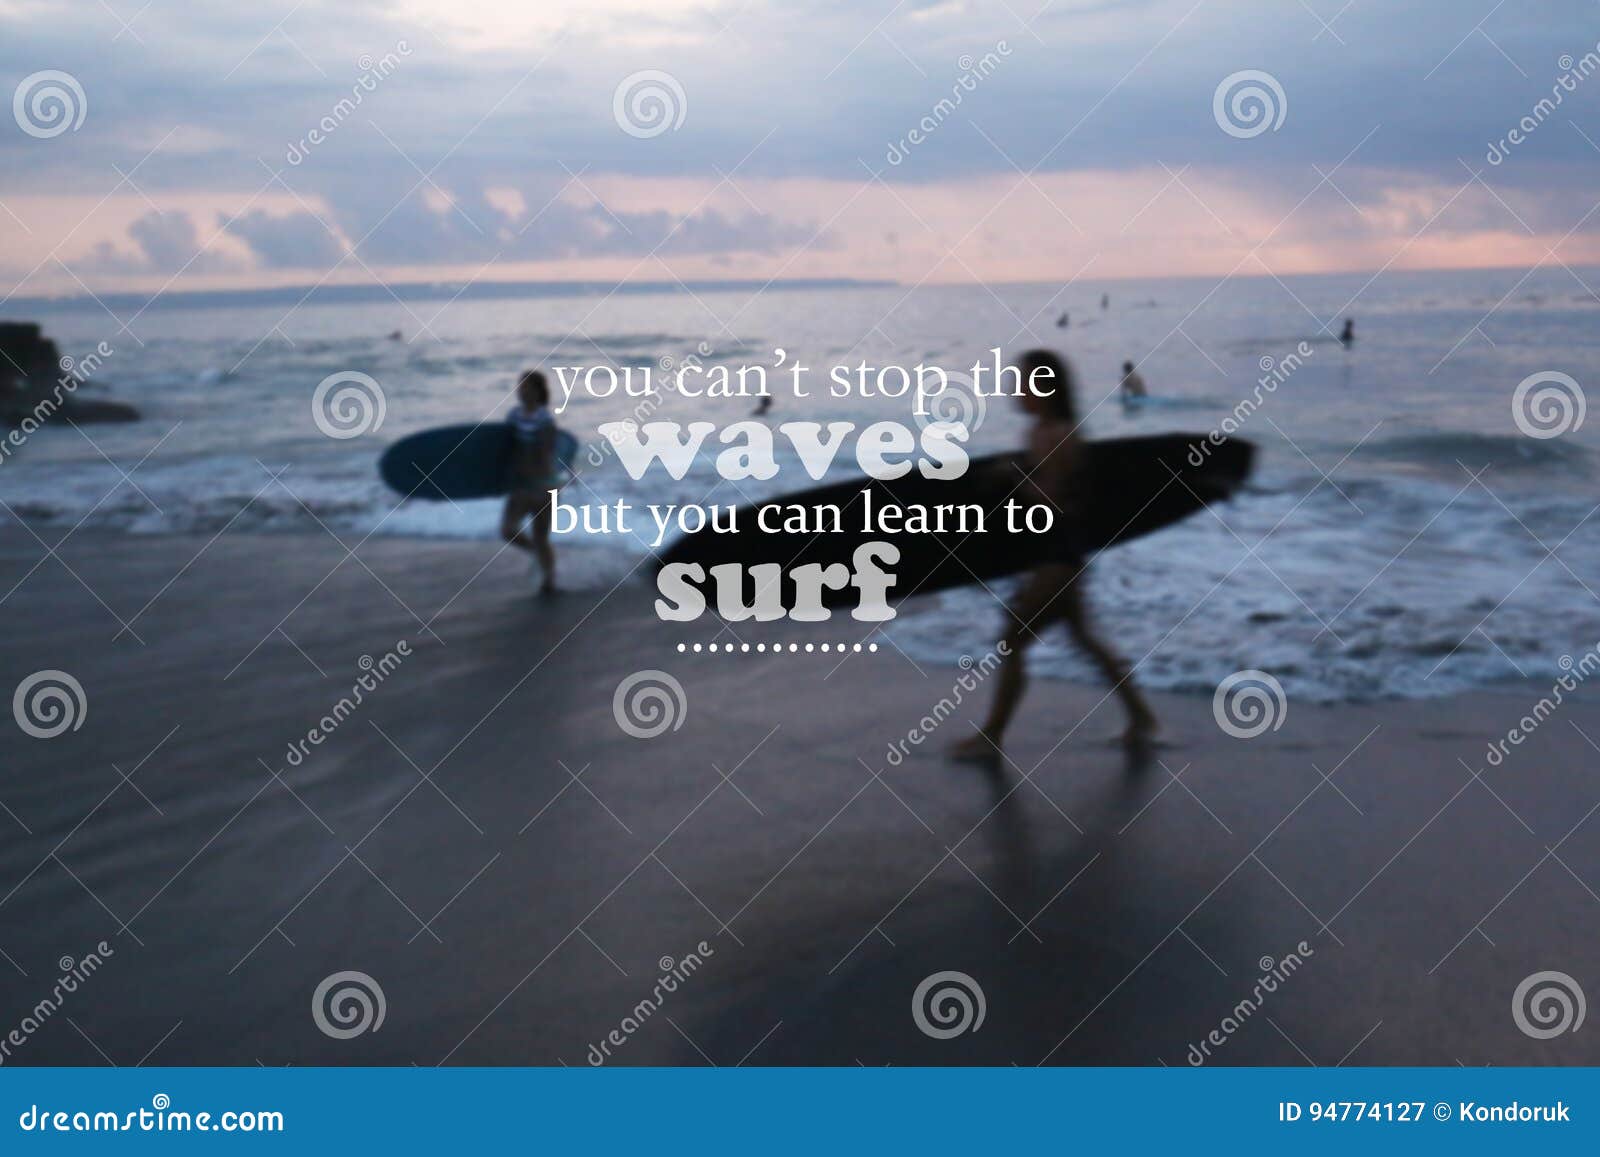 Blurry Sunset On The Beach With Inspirational Quote You Can T Stop The Waves But You Can Learn To Surf Stock Image Image Of Travel Indonesia